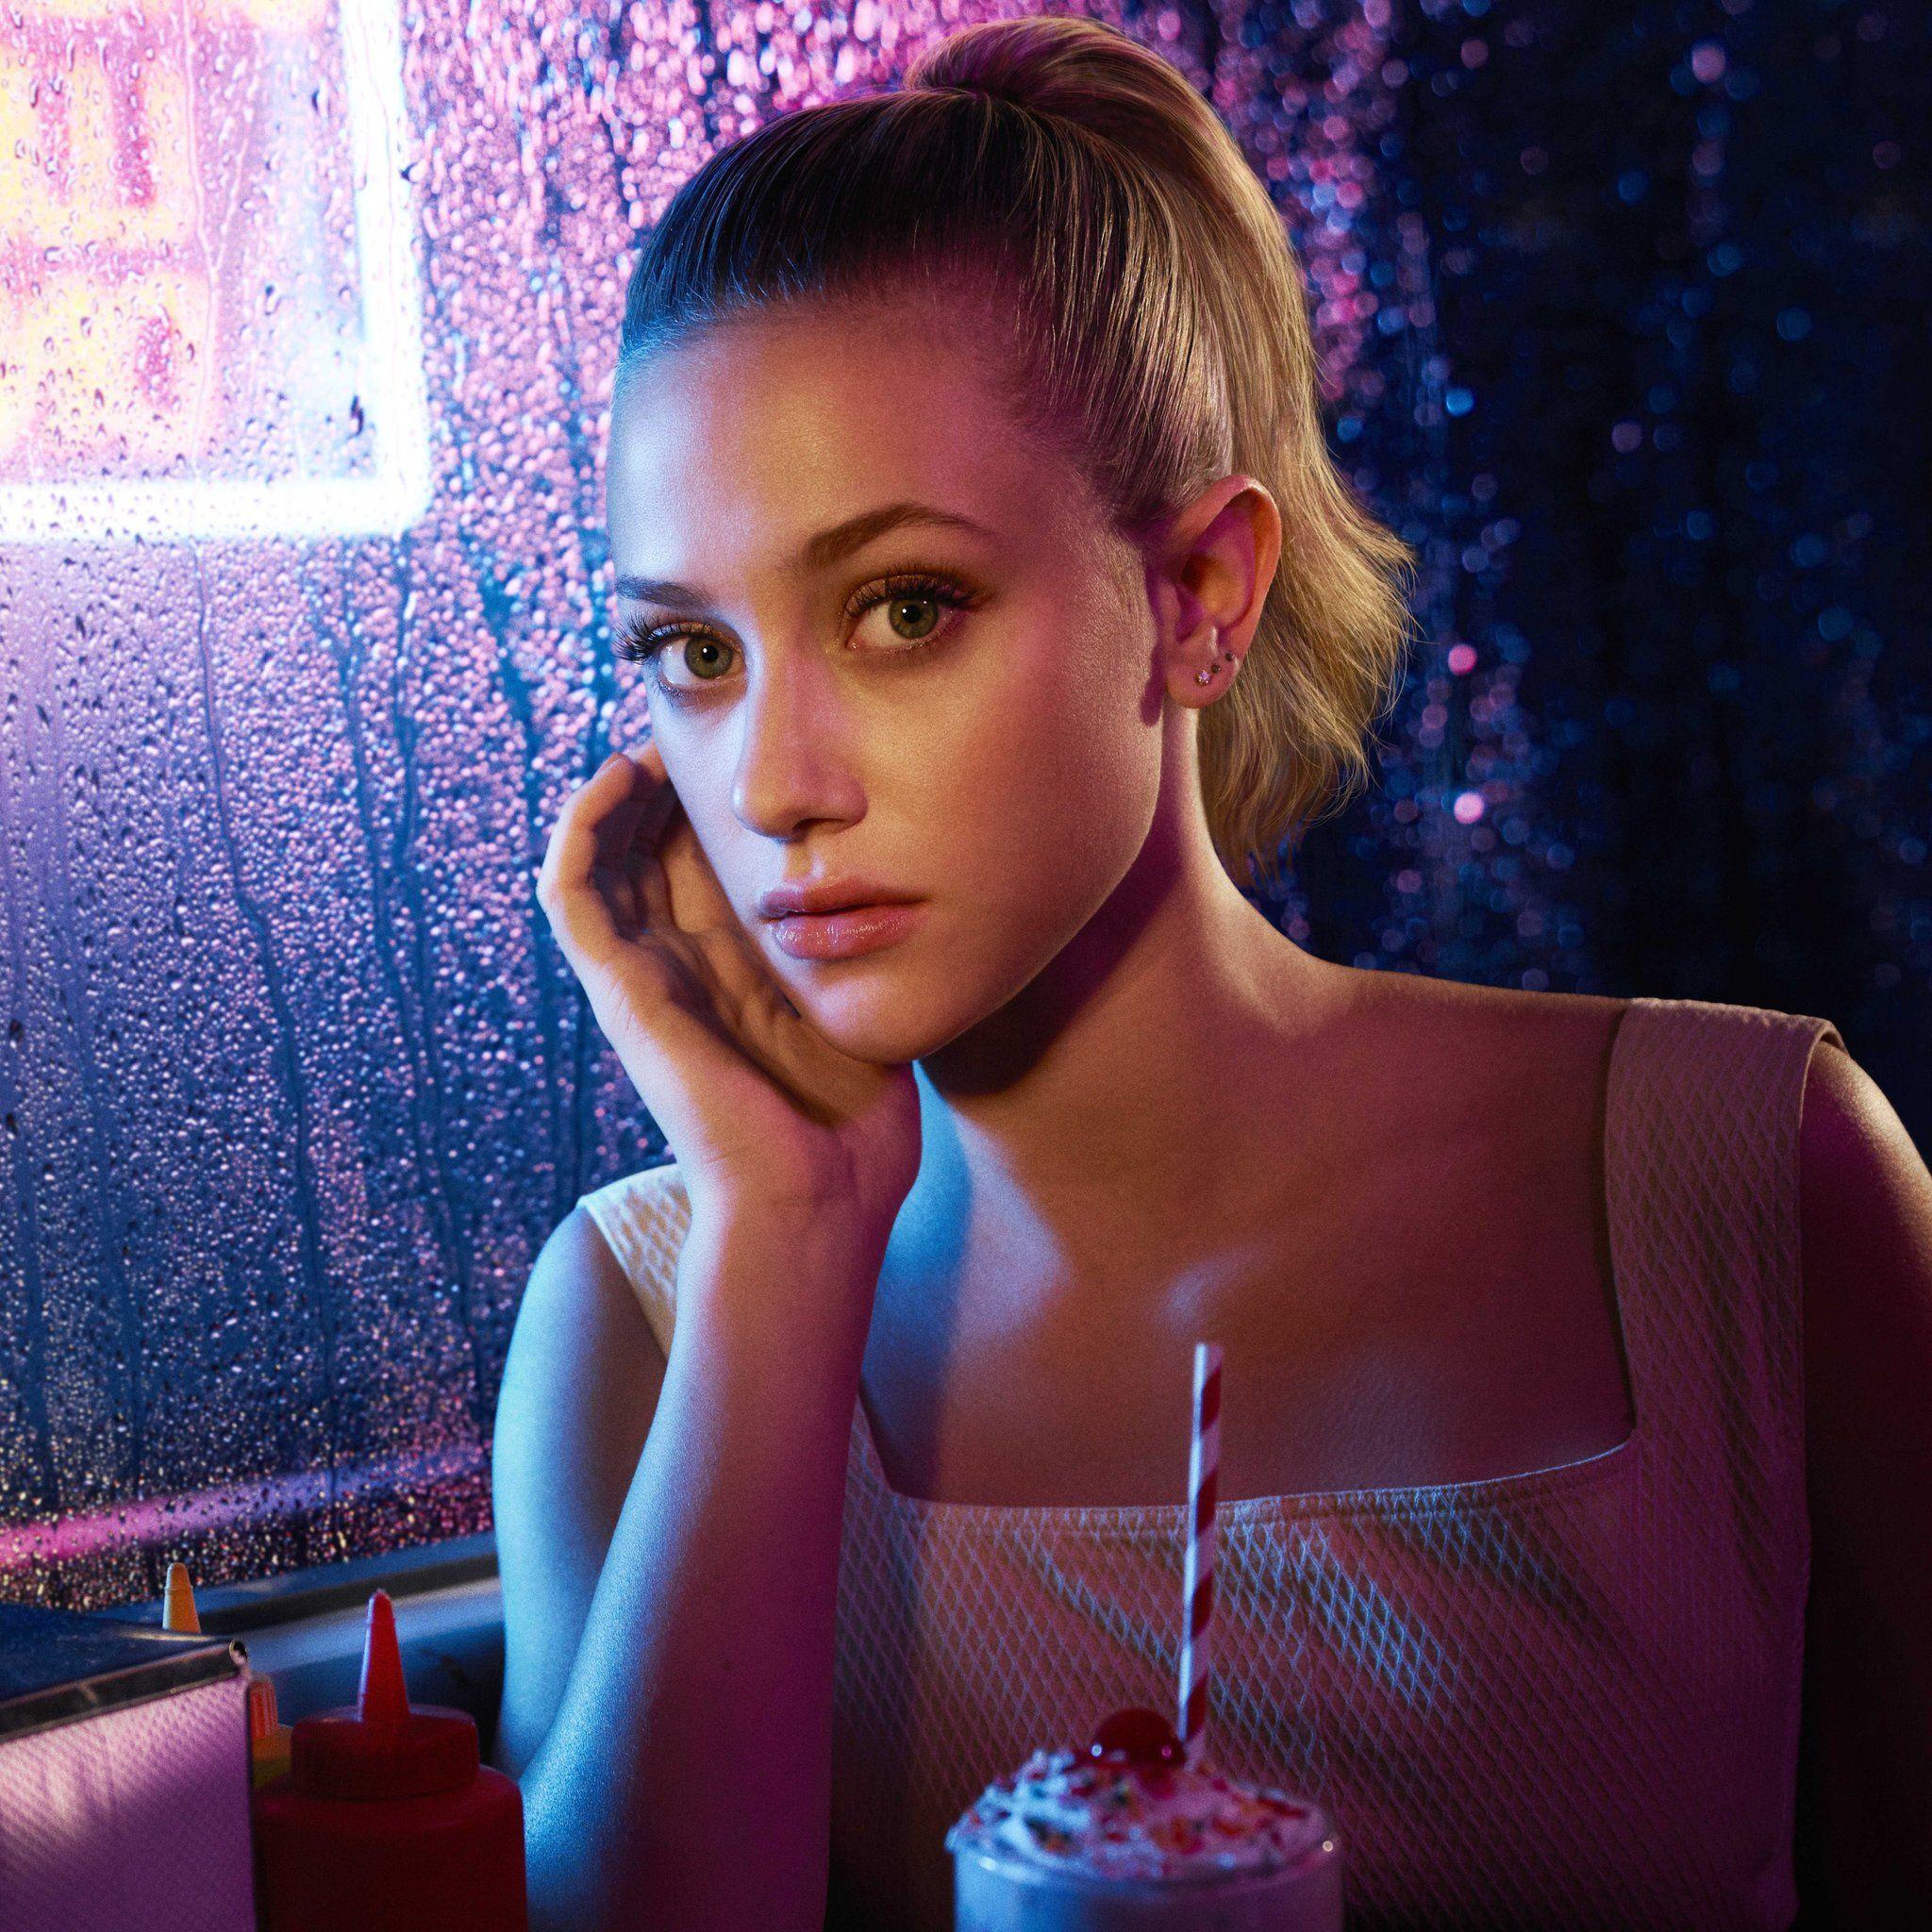 Betty Cooper In Riverdale, HD Tv Shows, 4k Wallpaper, Image